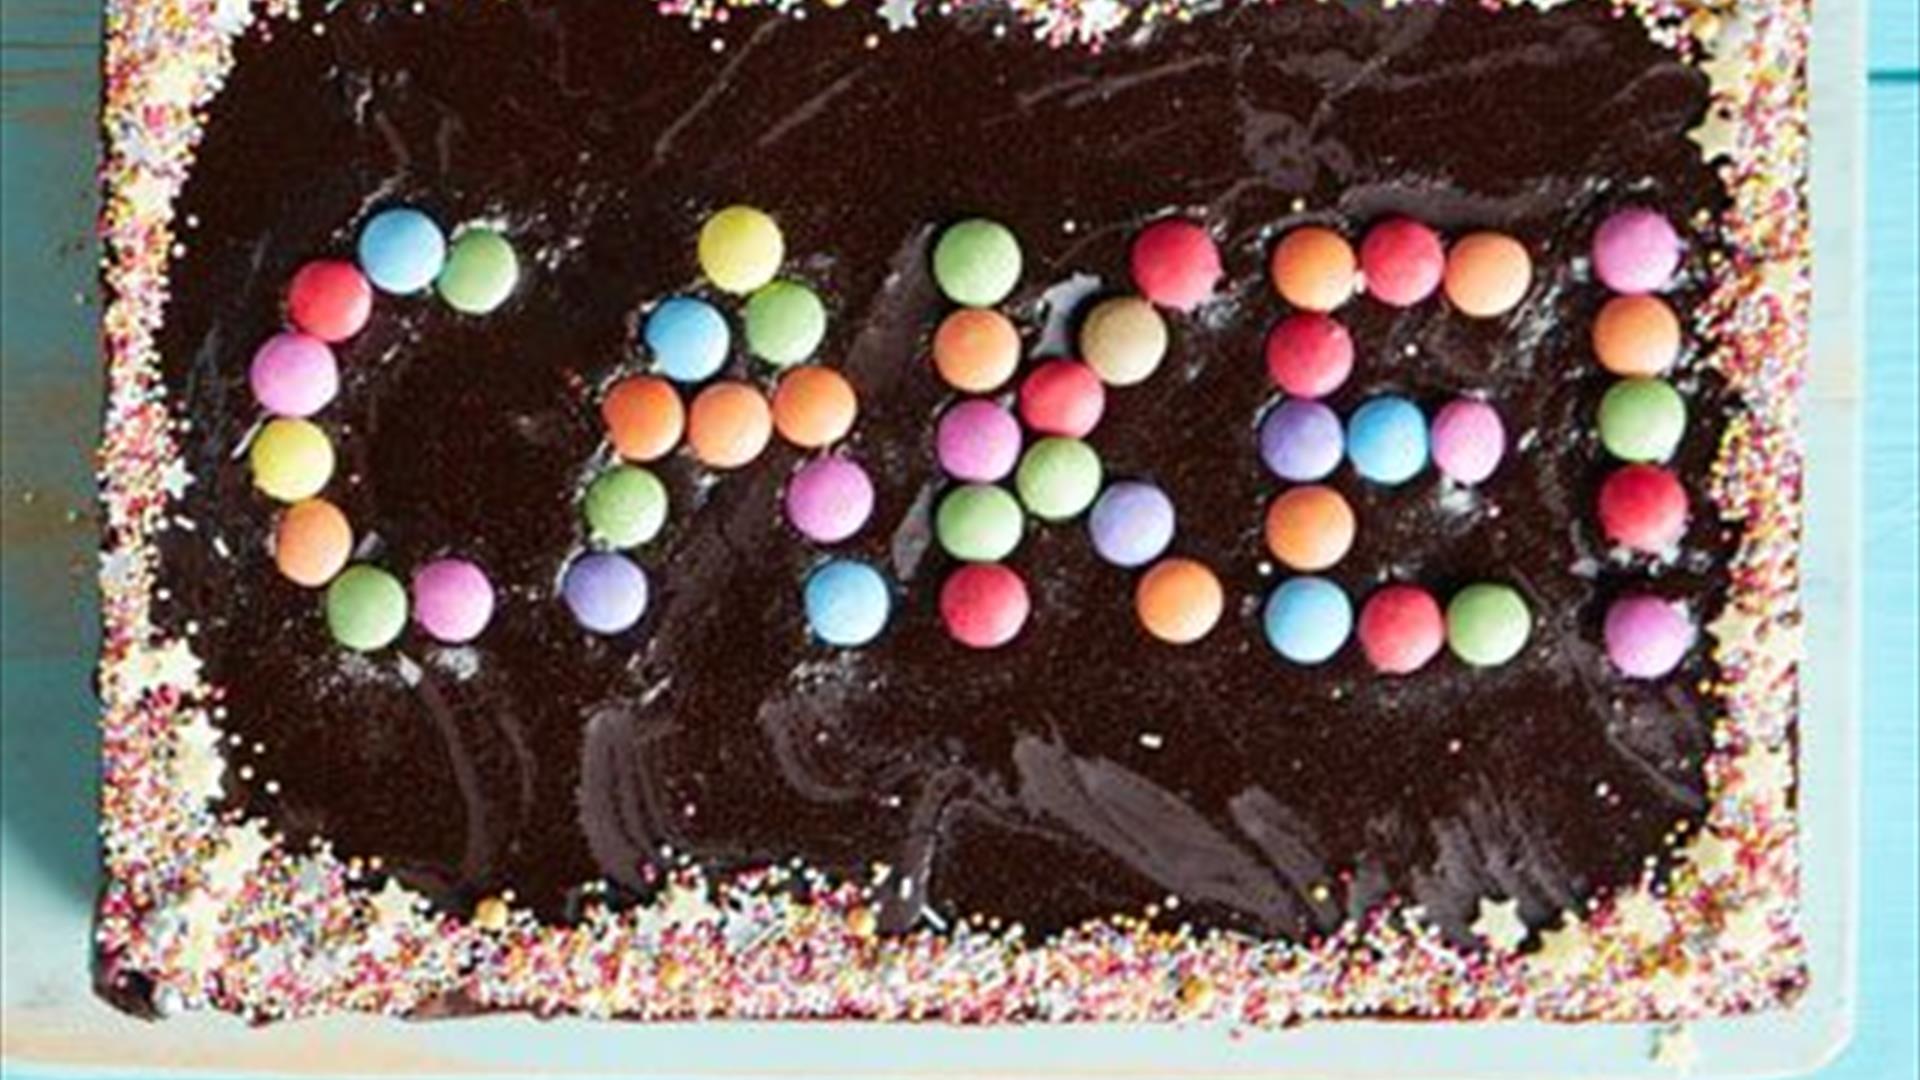 Image is of a cake with sweets spelling CAKE